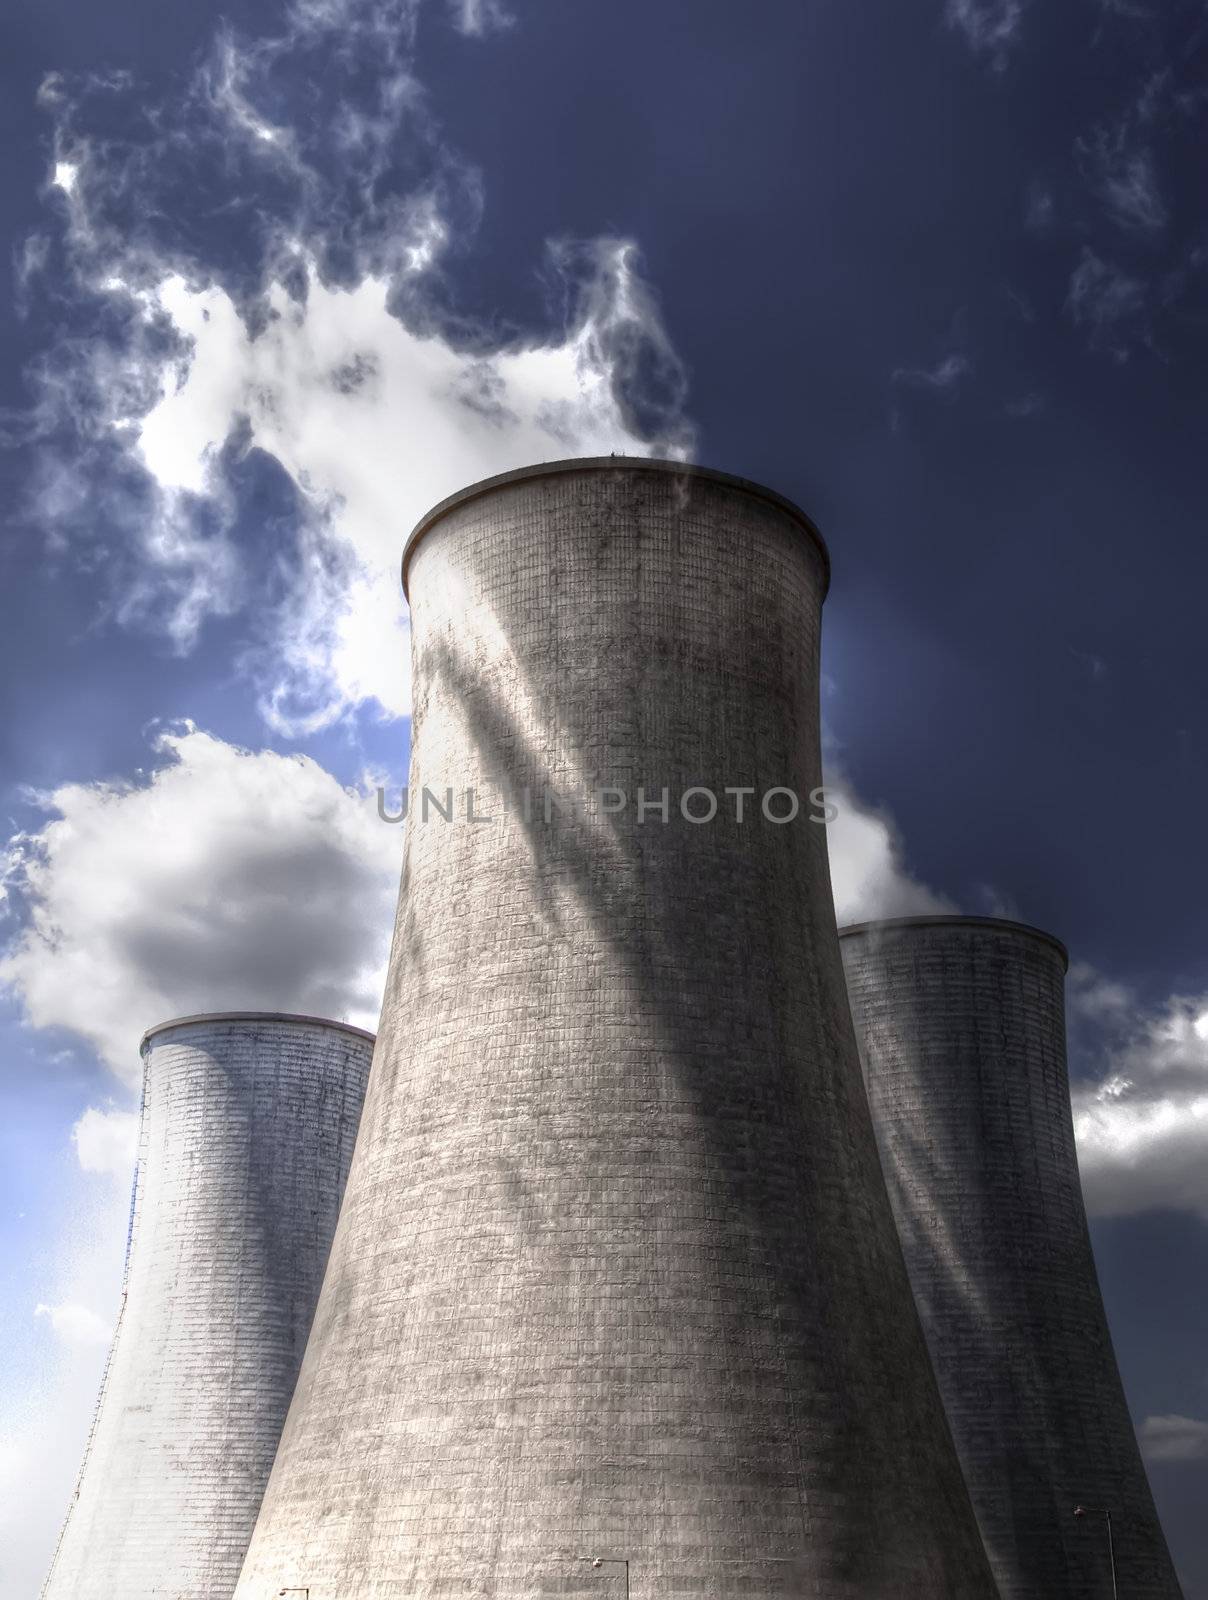 nuclear power plant by woodoo